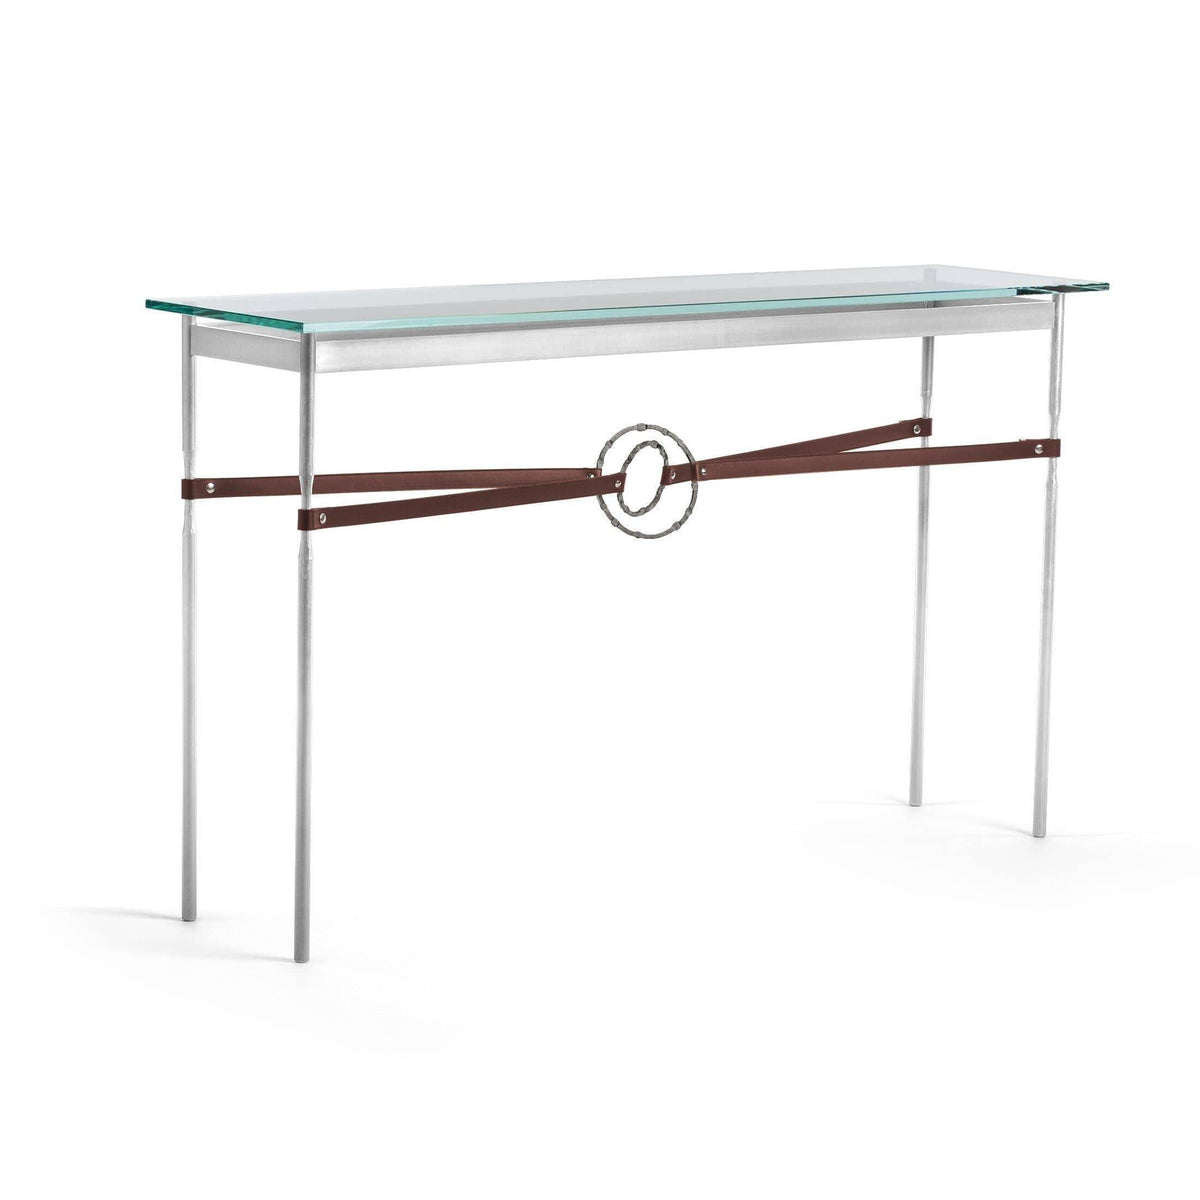 Hubbardton Forge - Equus Brown Leather Console Table - 750118-85-20-LB-VA0714 | Montreal Lighting & Hardware